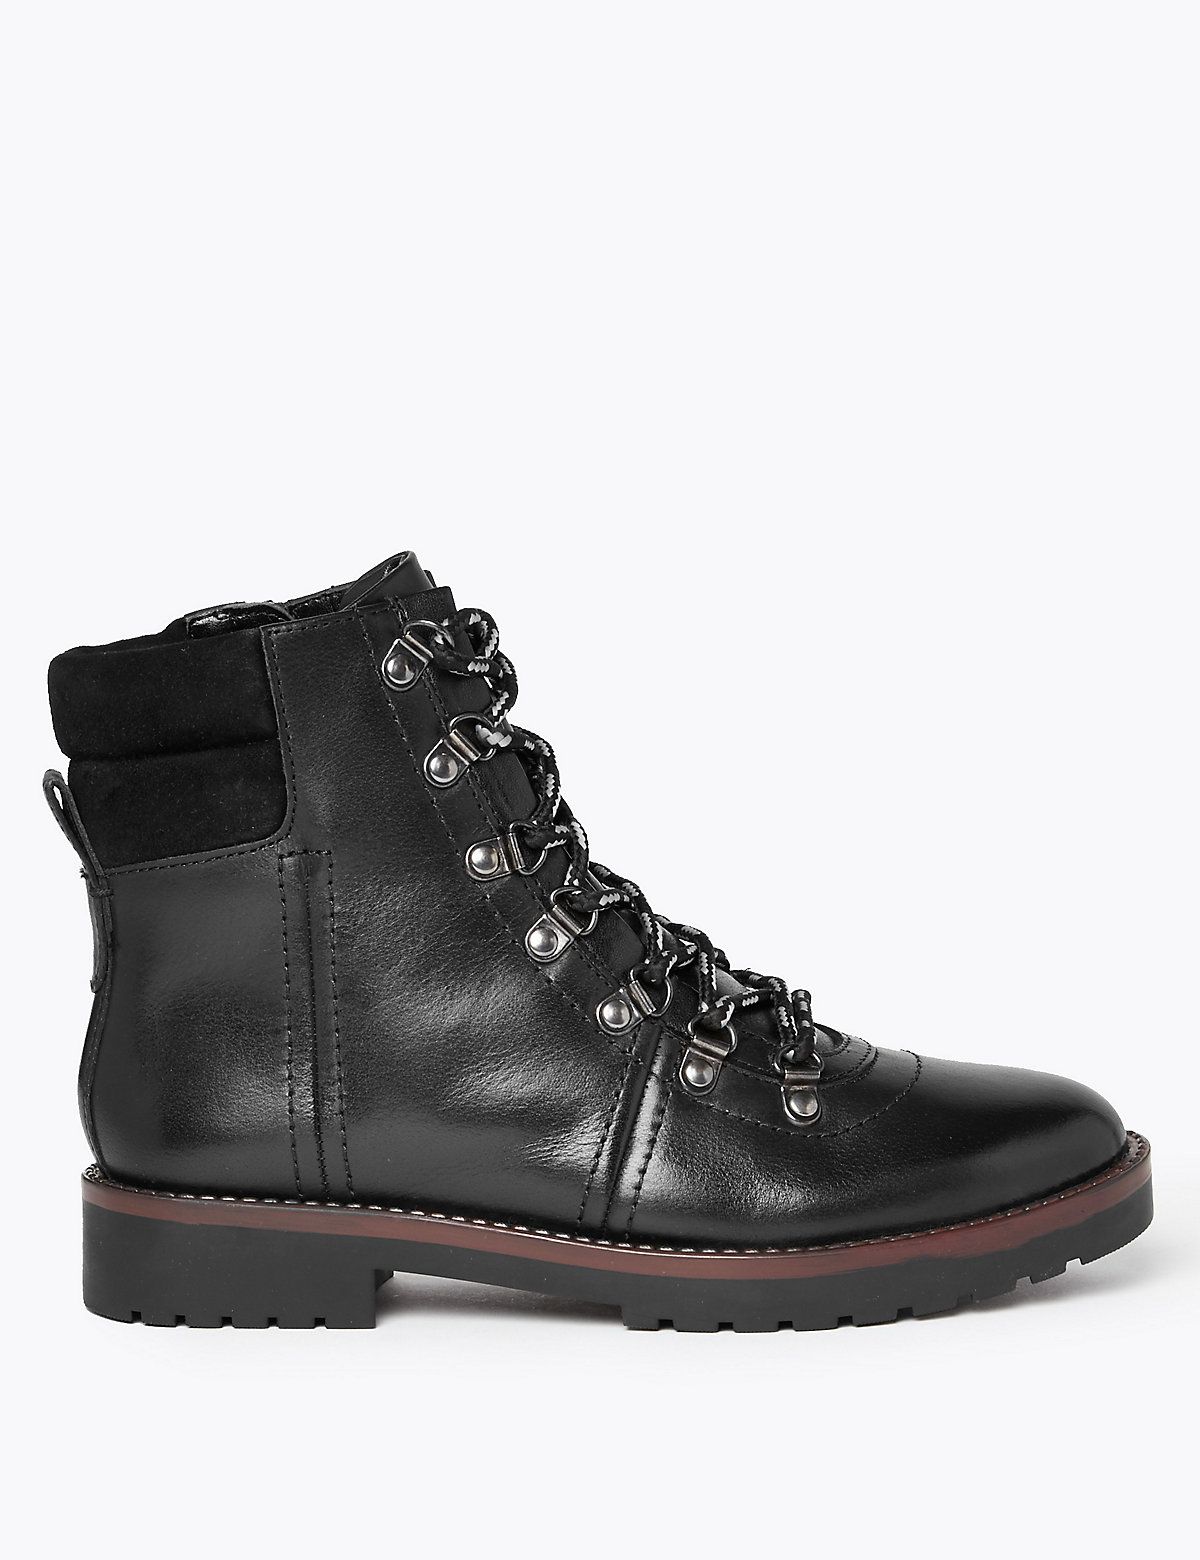 m&s ankle boots sale